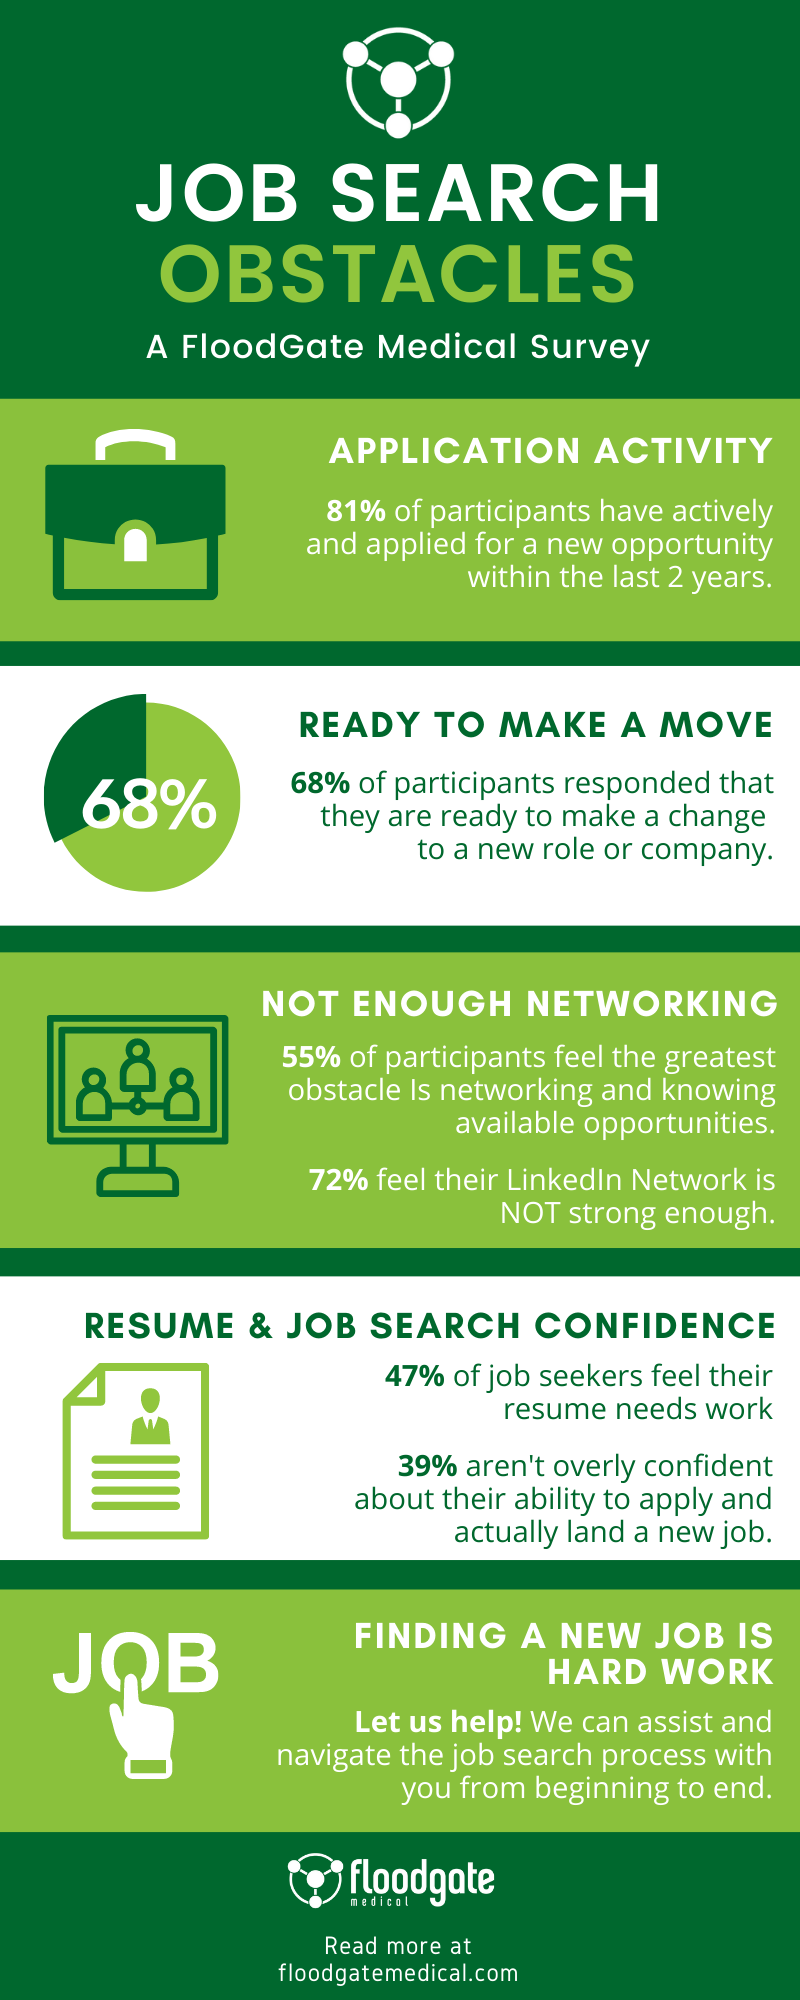 Job Search Obstacles Survey Data Infogrpahic